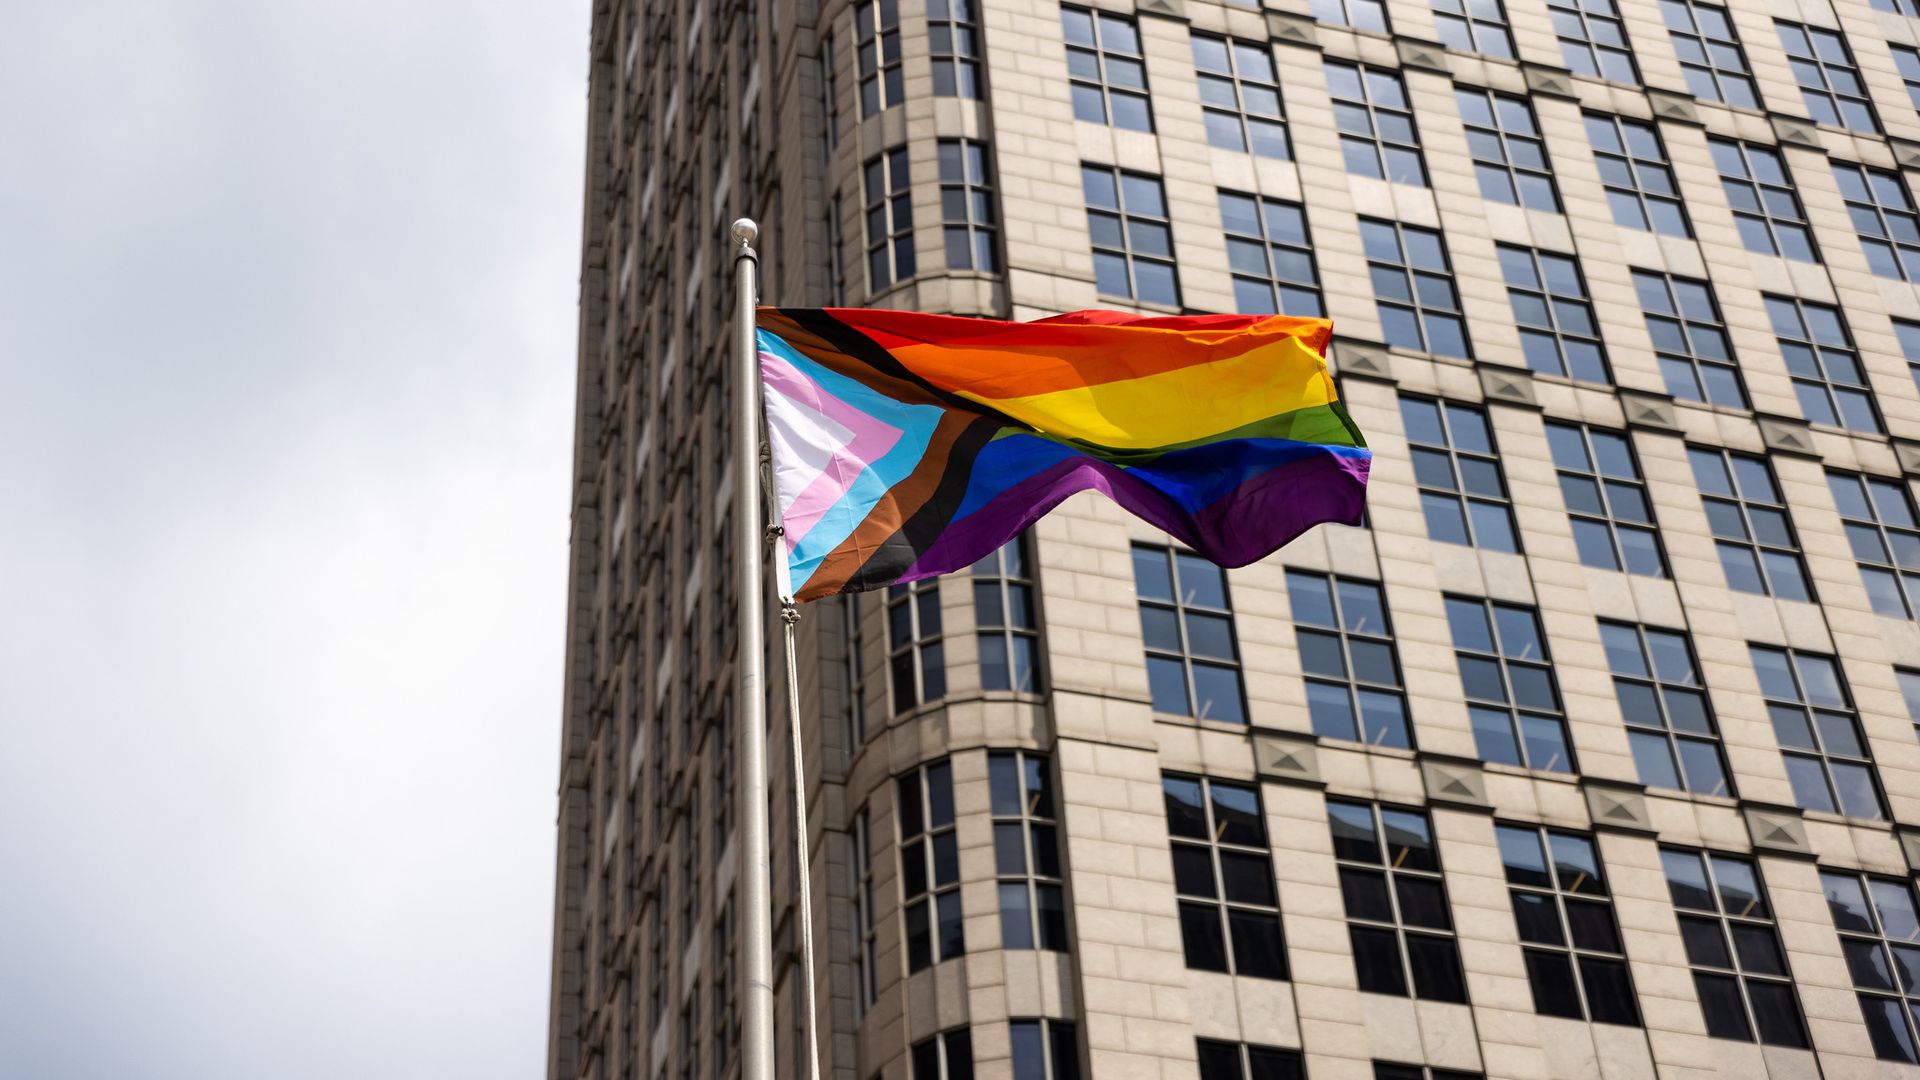 A Pride flag blows in the wind in Detroit in front of a high-rise building.